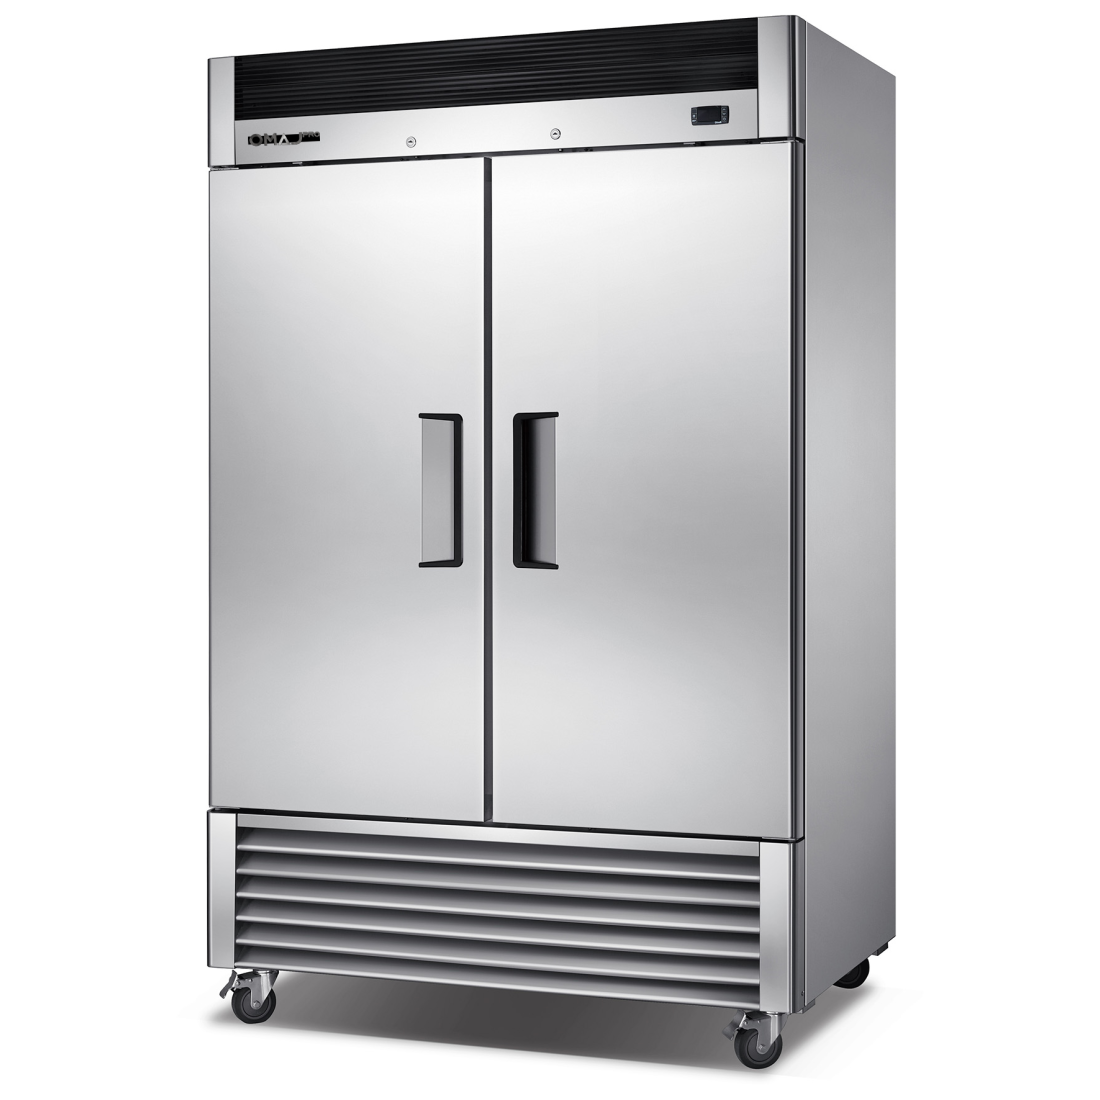 OMAJ PRO Stainless Steel Upright Two Door Chiller 1220 Lt|mkayn|مكاين